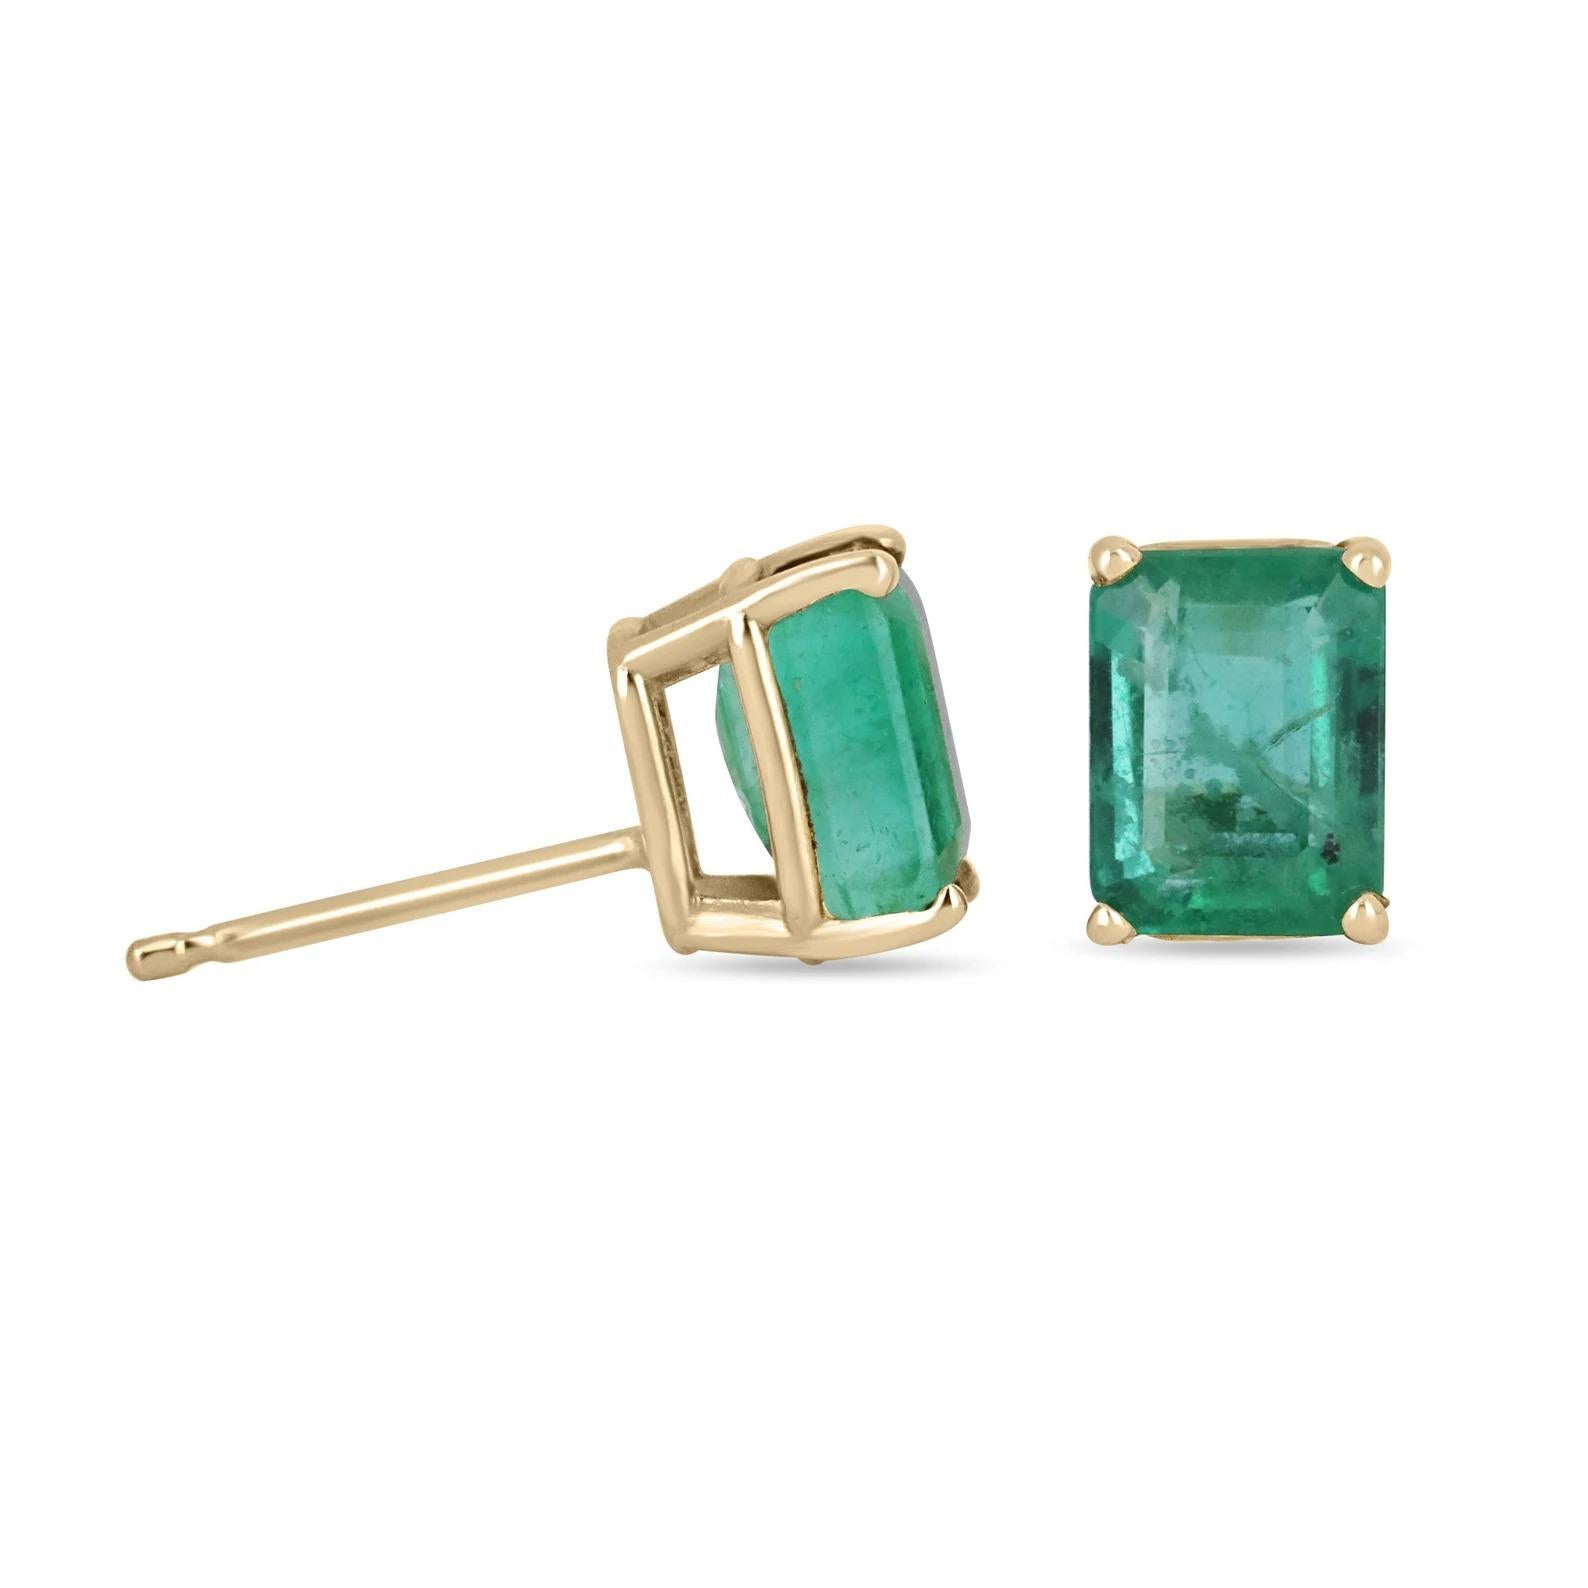 Featured here is a beautiful set of emerald cut emerald studs in fine 14K yellow gold. Displayed are dark green emeralds with very good transparency, accented by a simple four-prong 14K gold mount, allowing for the emerald to be shown in full view.